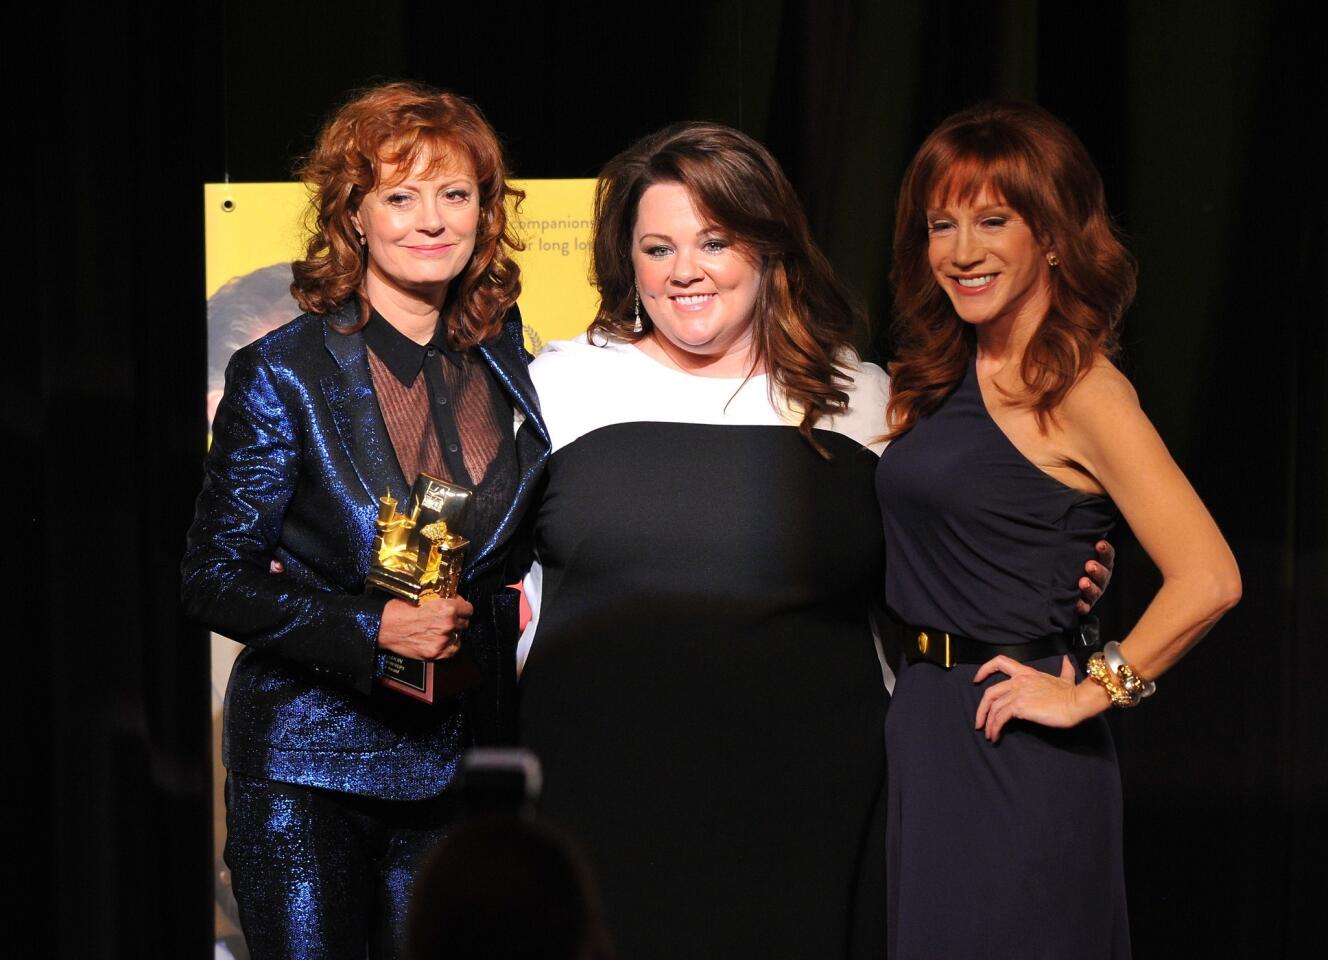 Susan Sarandon, Melissa McCarthy and Kathy Griffin pose together following Sarandon's acceptance of her lifetime achievement award.